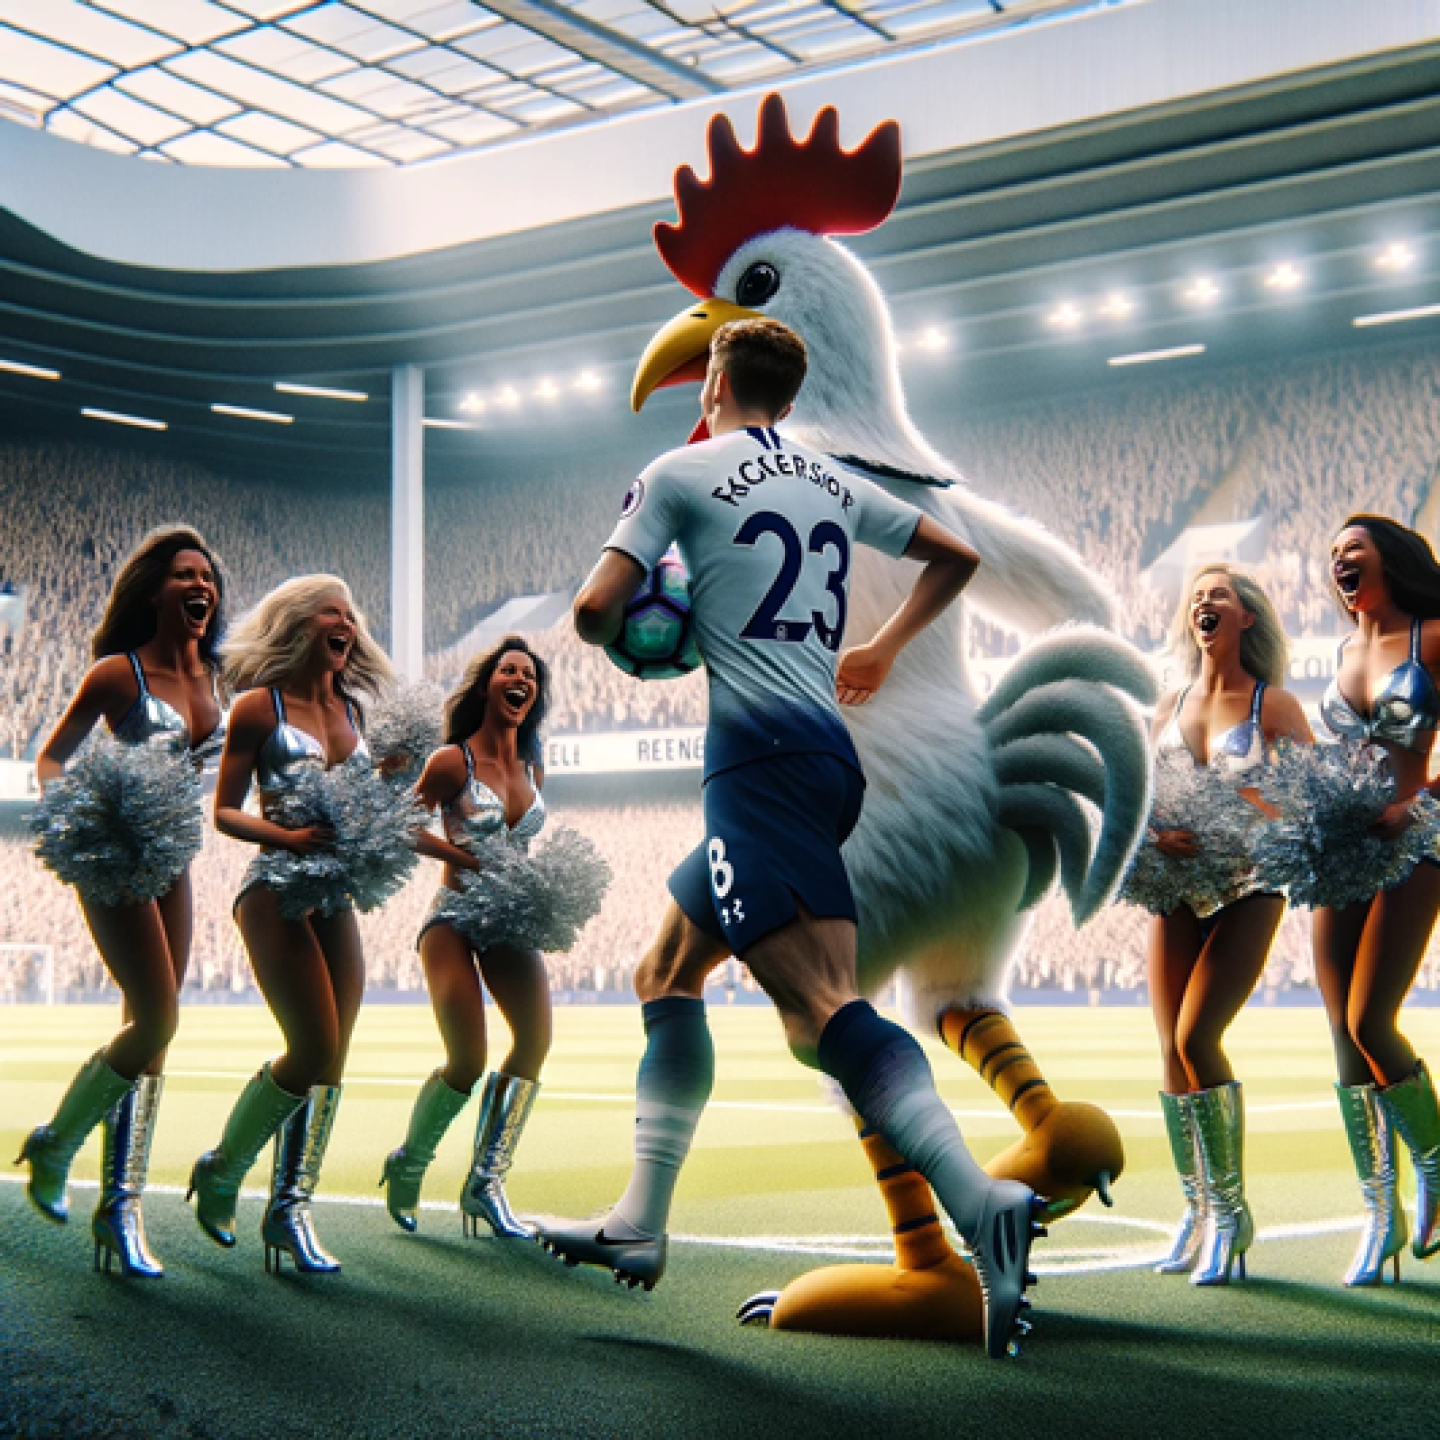 Spurs with Cockerel